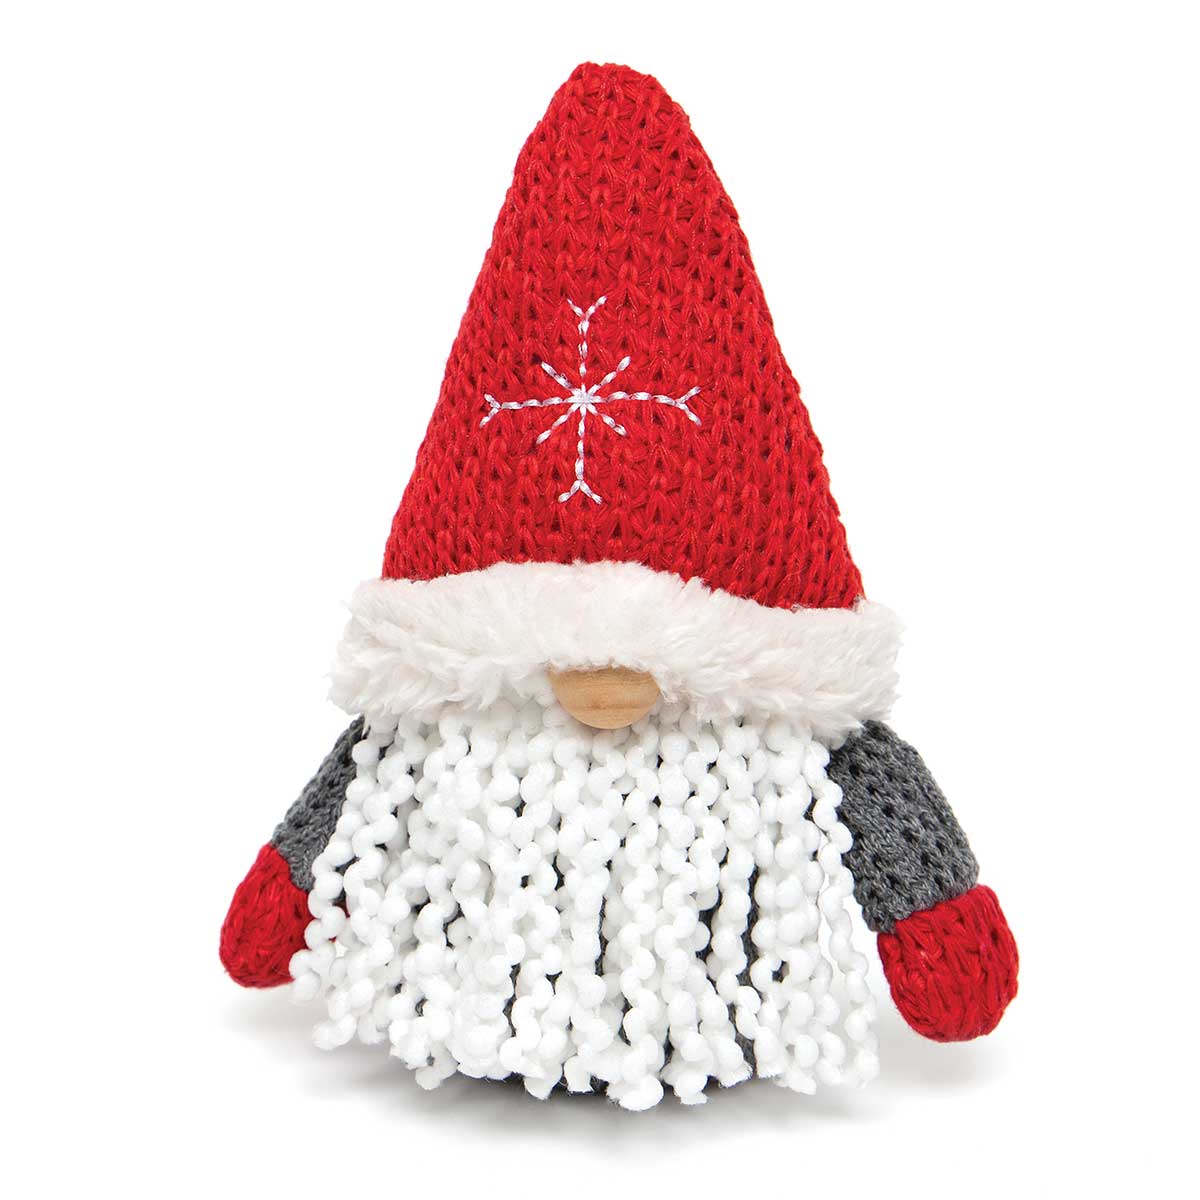 !RAGLAN GNOME ORNAMENT RED/GREY WITH SWEATER HAT v22